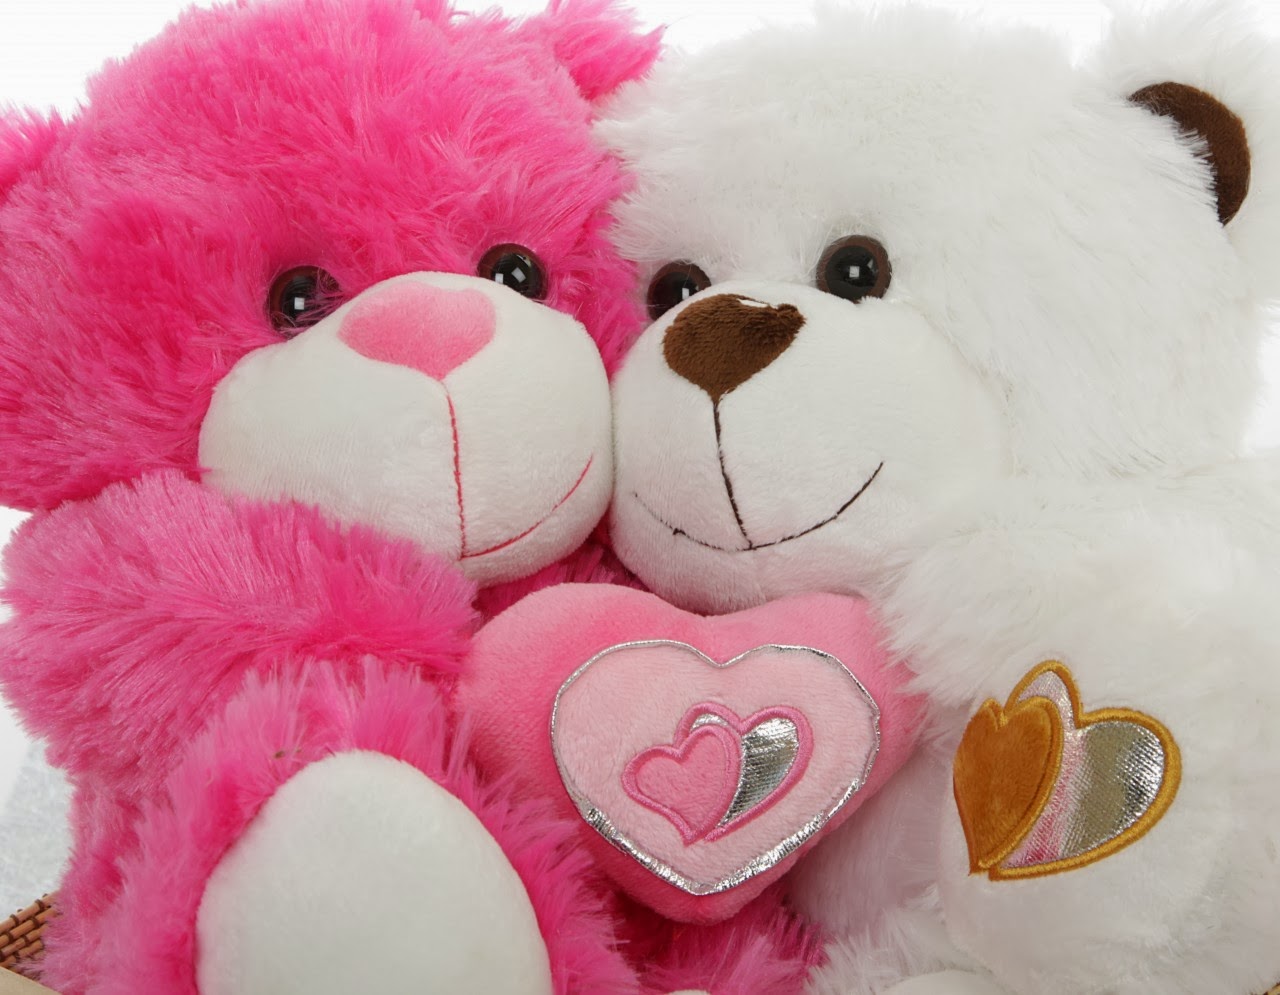  Cute  Teddy  Bear  Pictures  HD Images Free Download desktop 